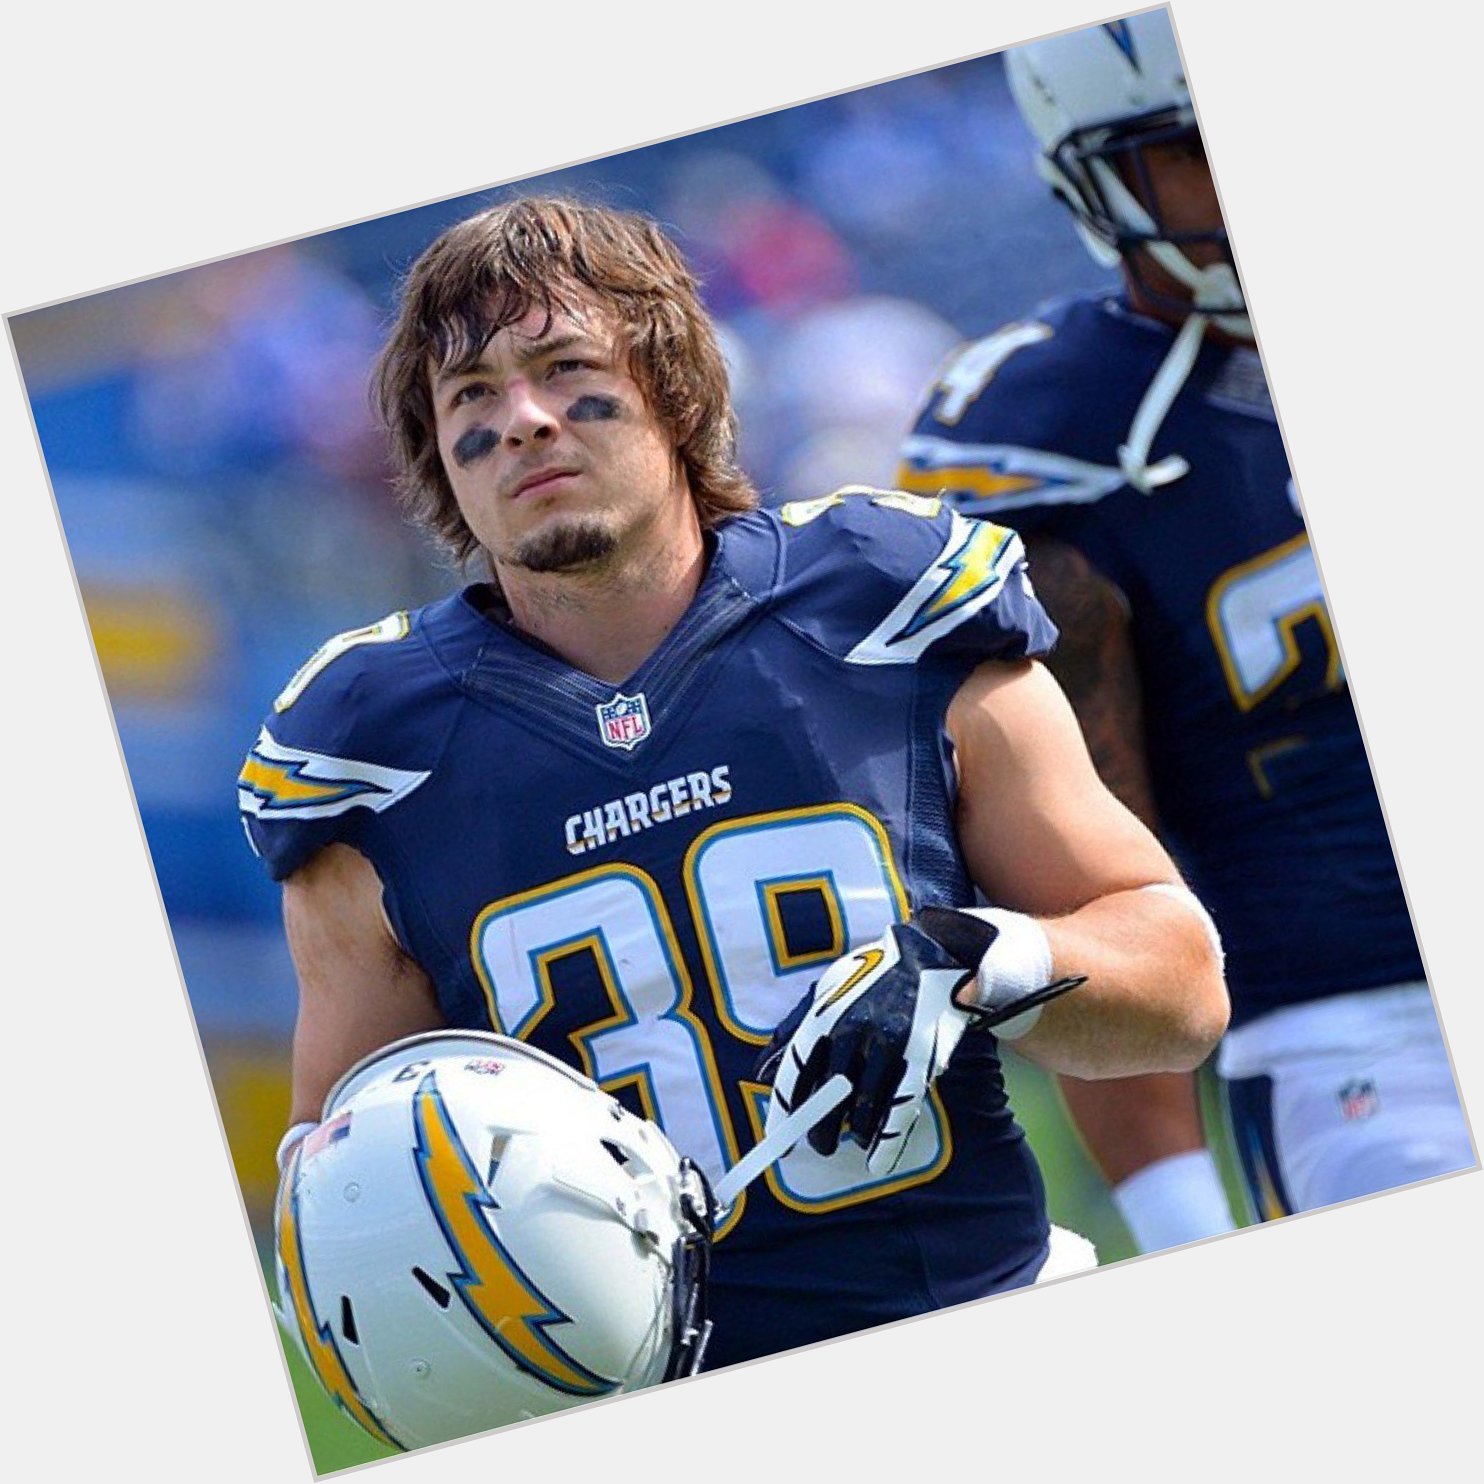 Happy 30th birthday to the one and only Danny Woodhead! Congratulations 